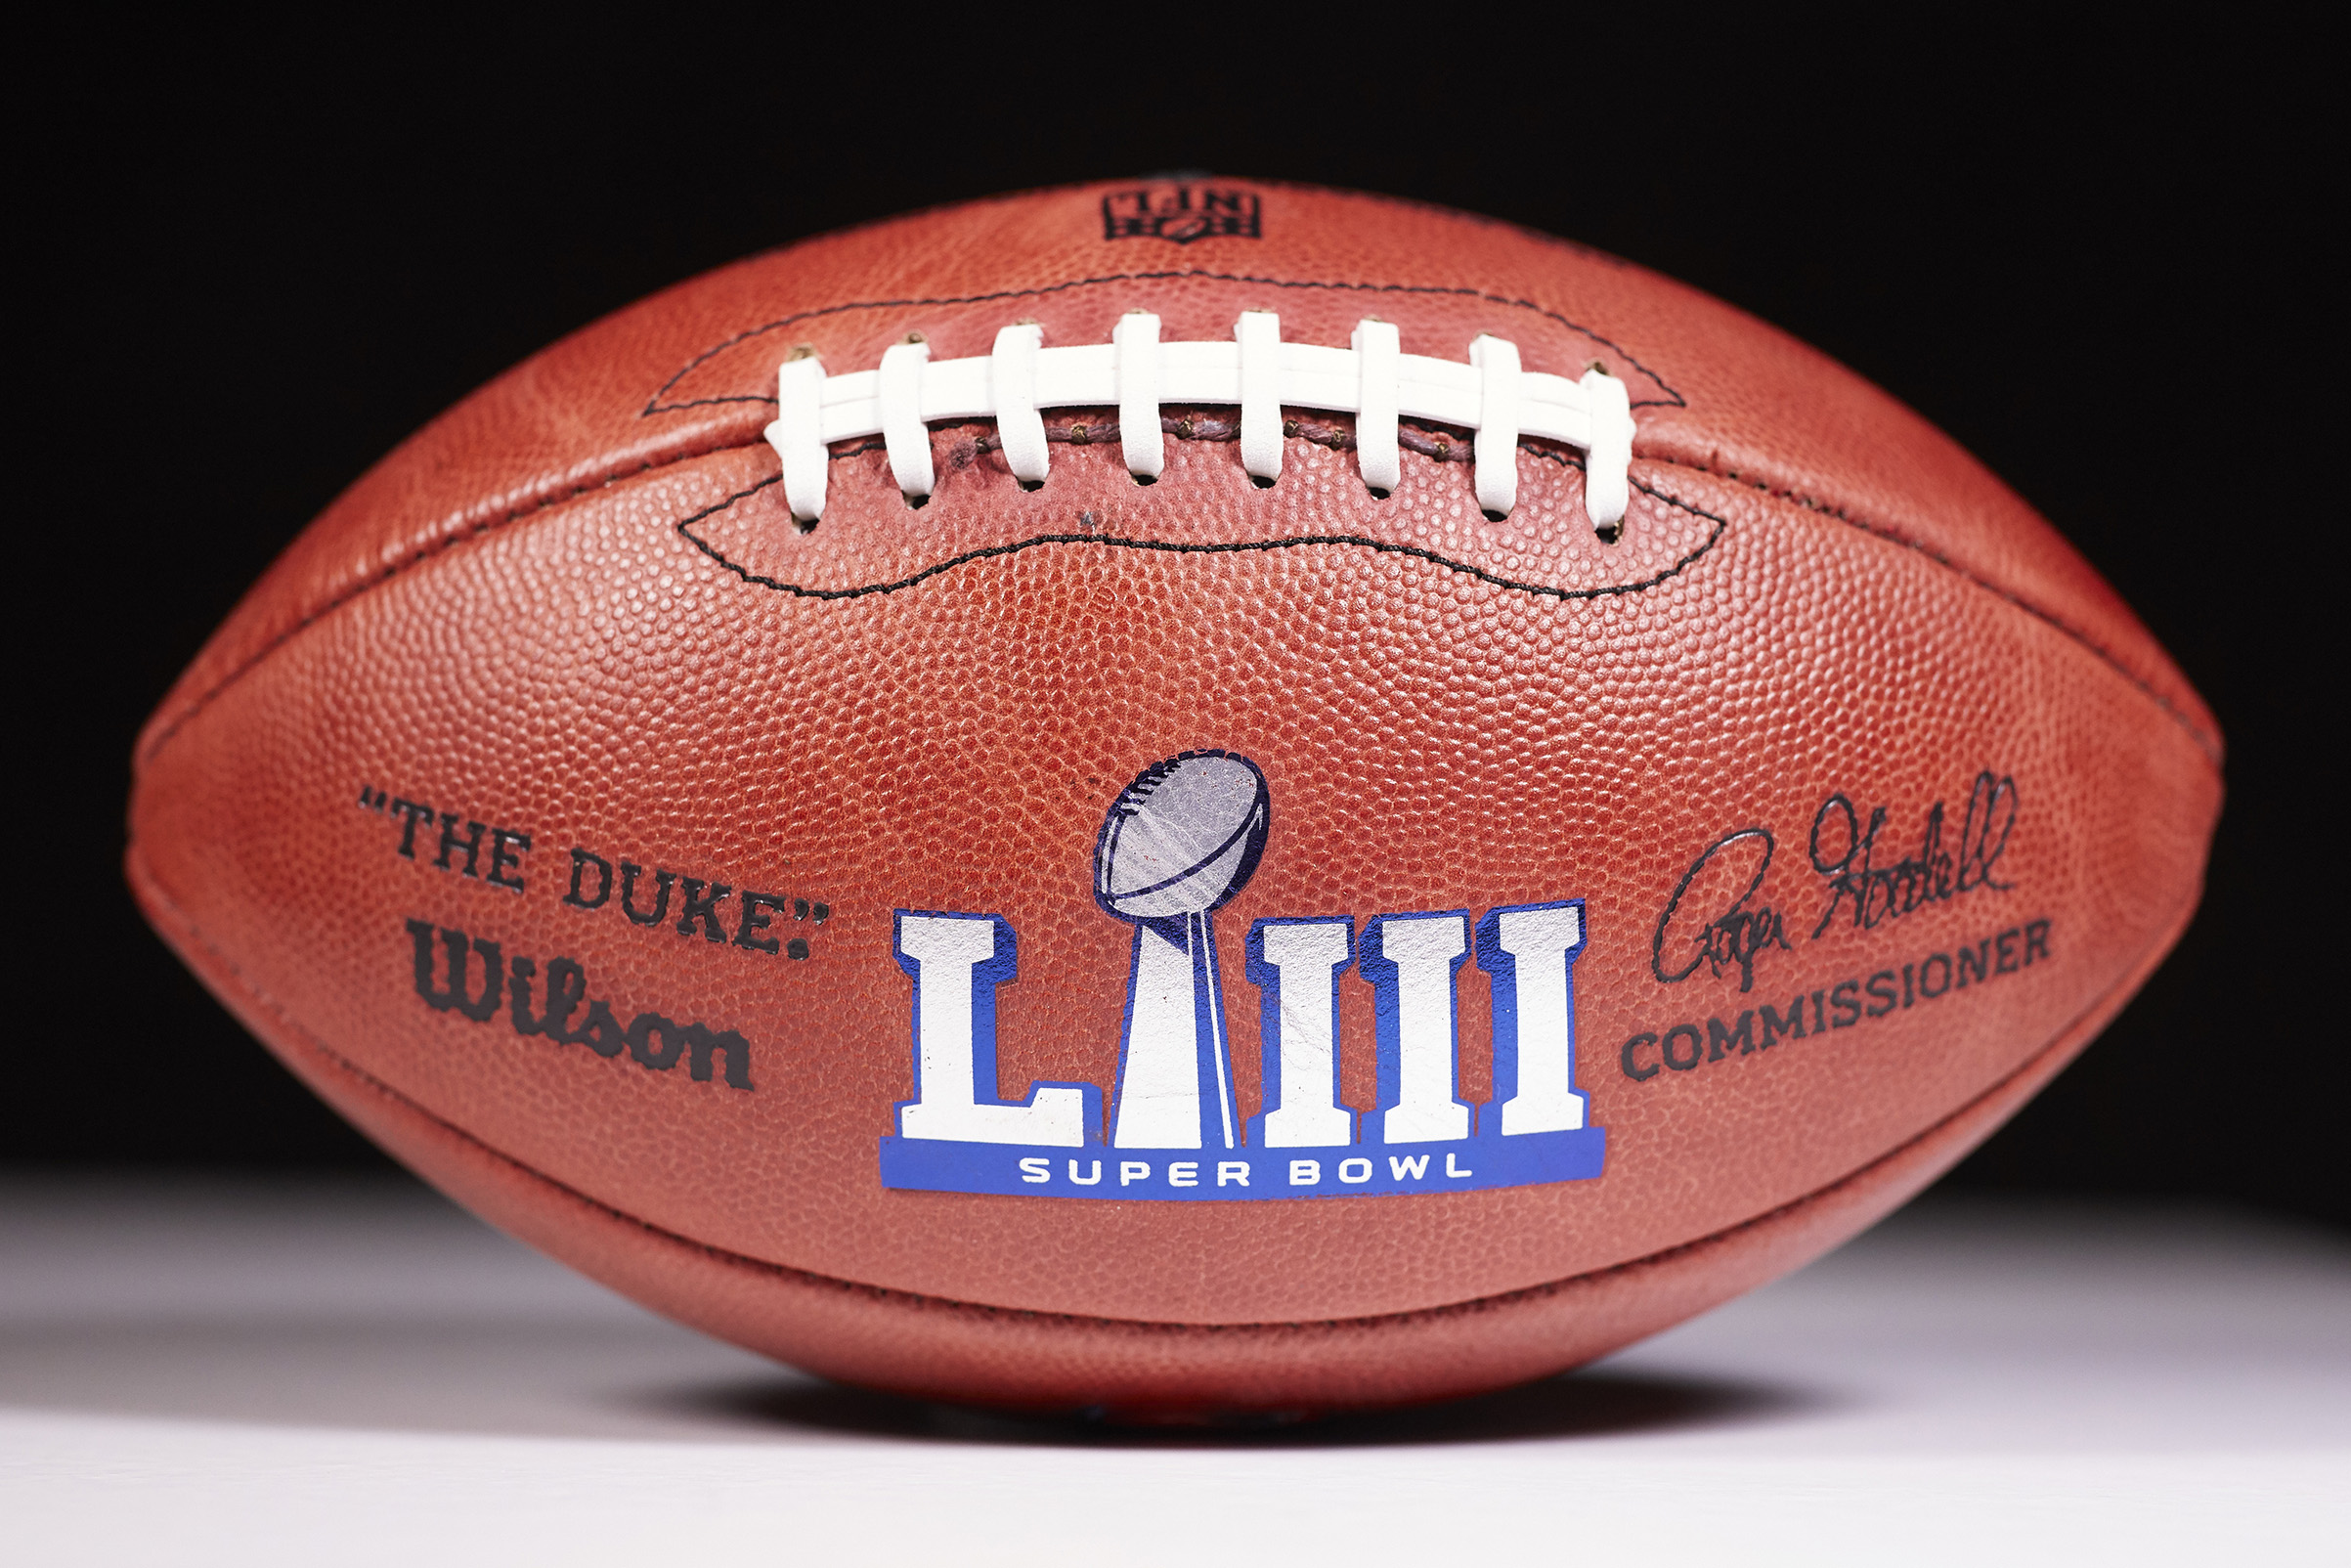 Super Bowl History: Why Are Footballs Shaped Like That? | Time